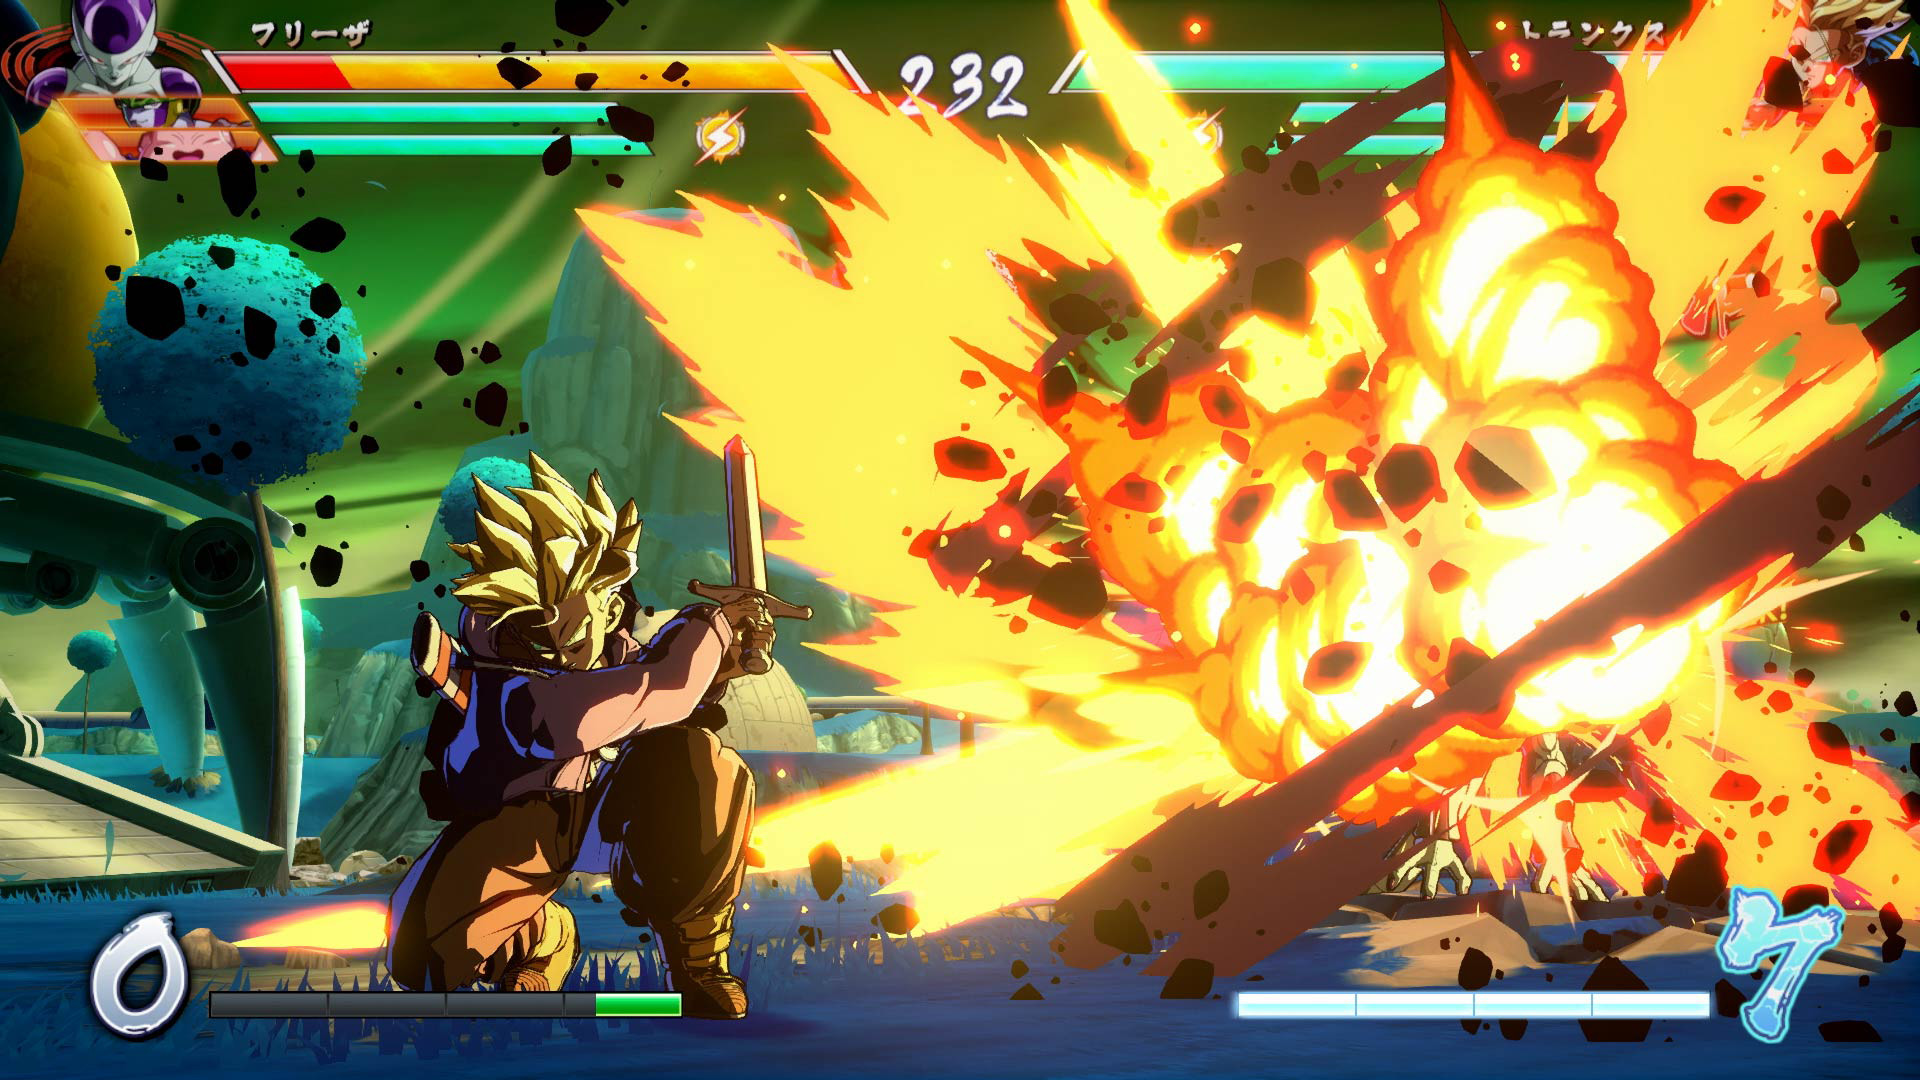 Play Arcade Dragonball Z (rev A) Online in your browser 